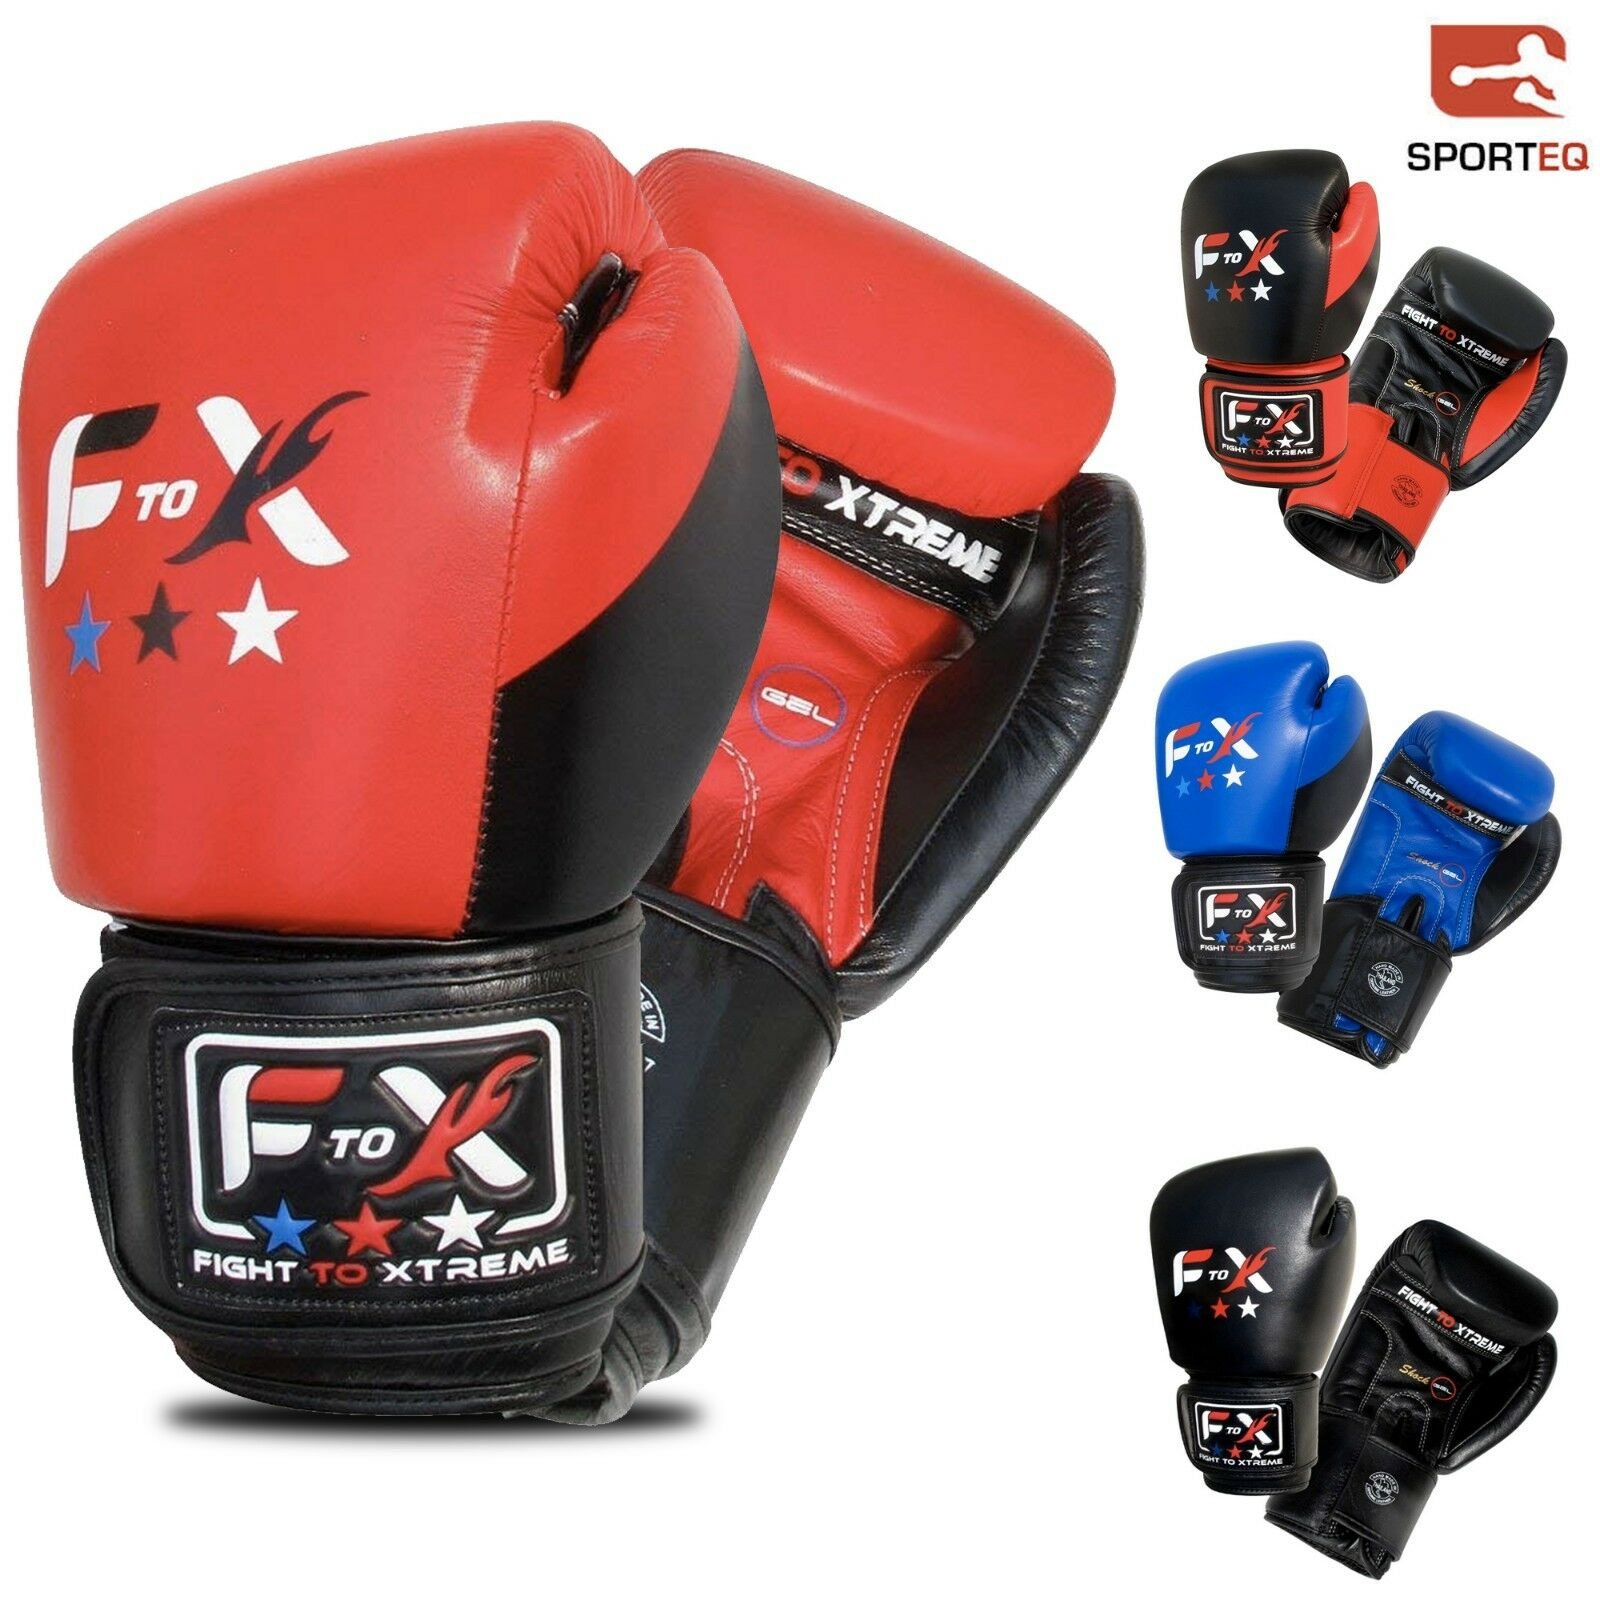 What Equipment Do I Need To Start Boxing